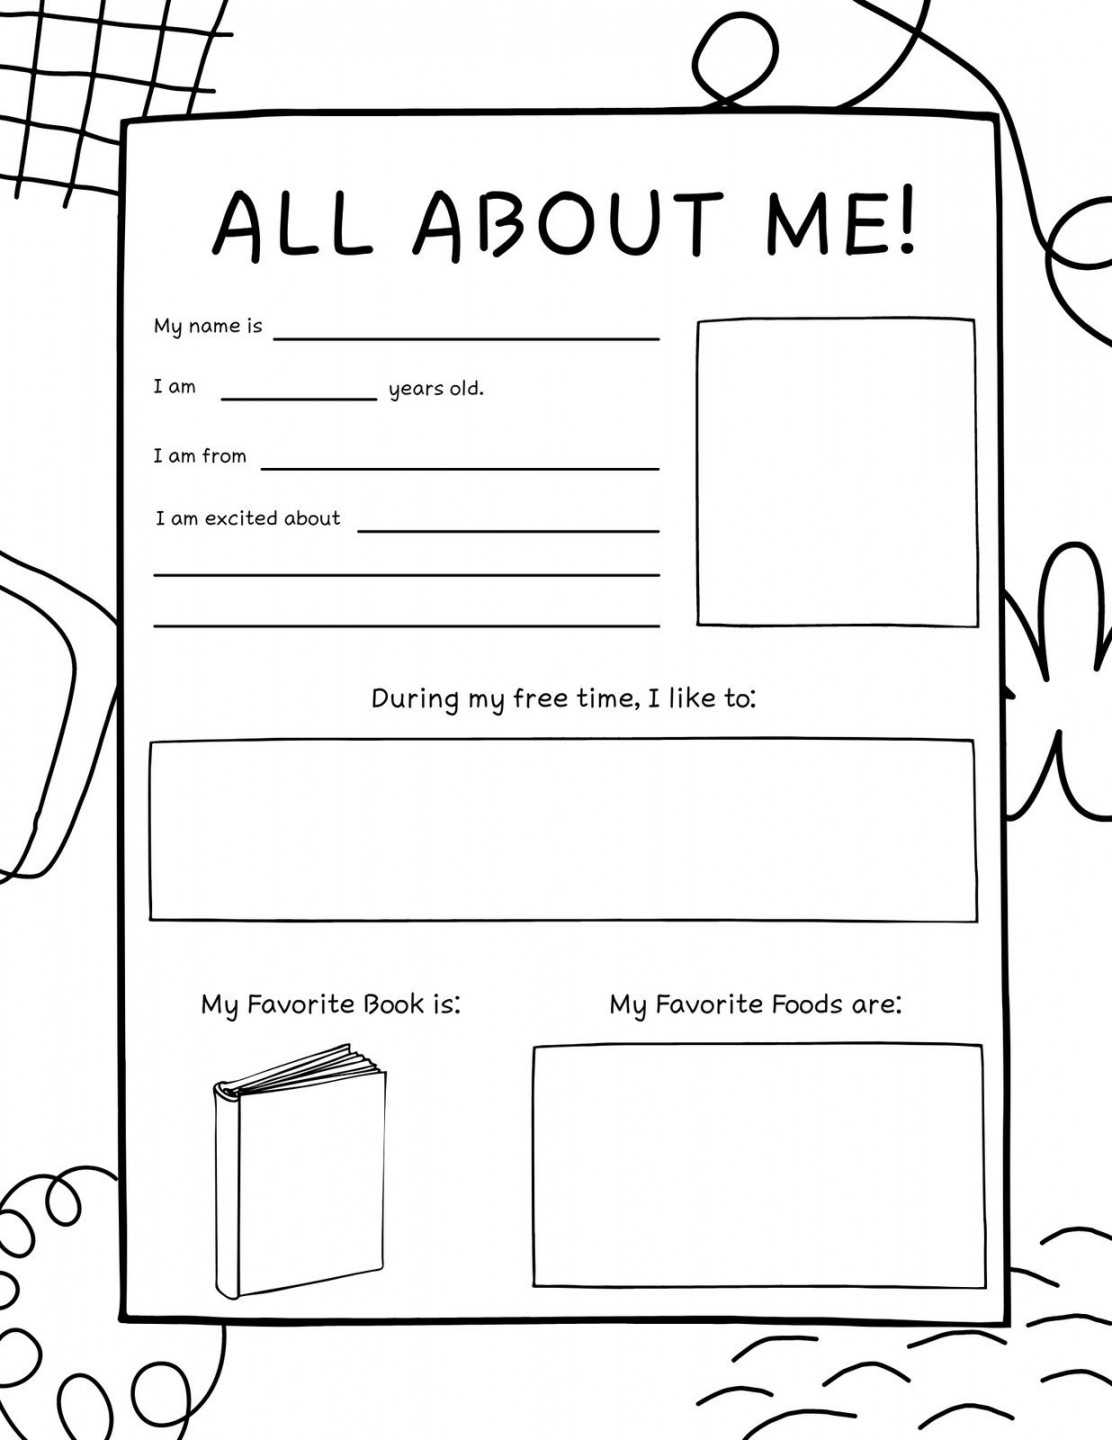 Free and printable All About Me worksheet templates  Canva